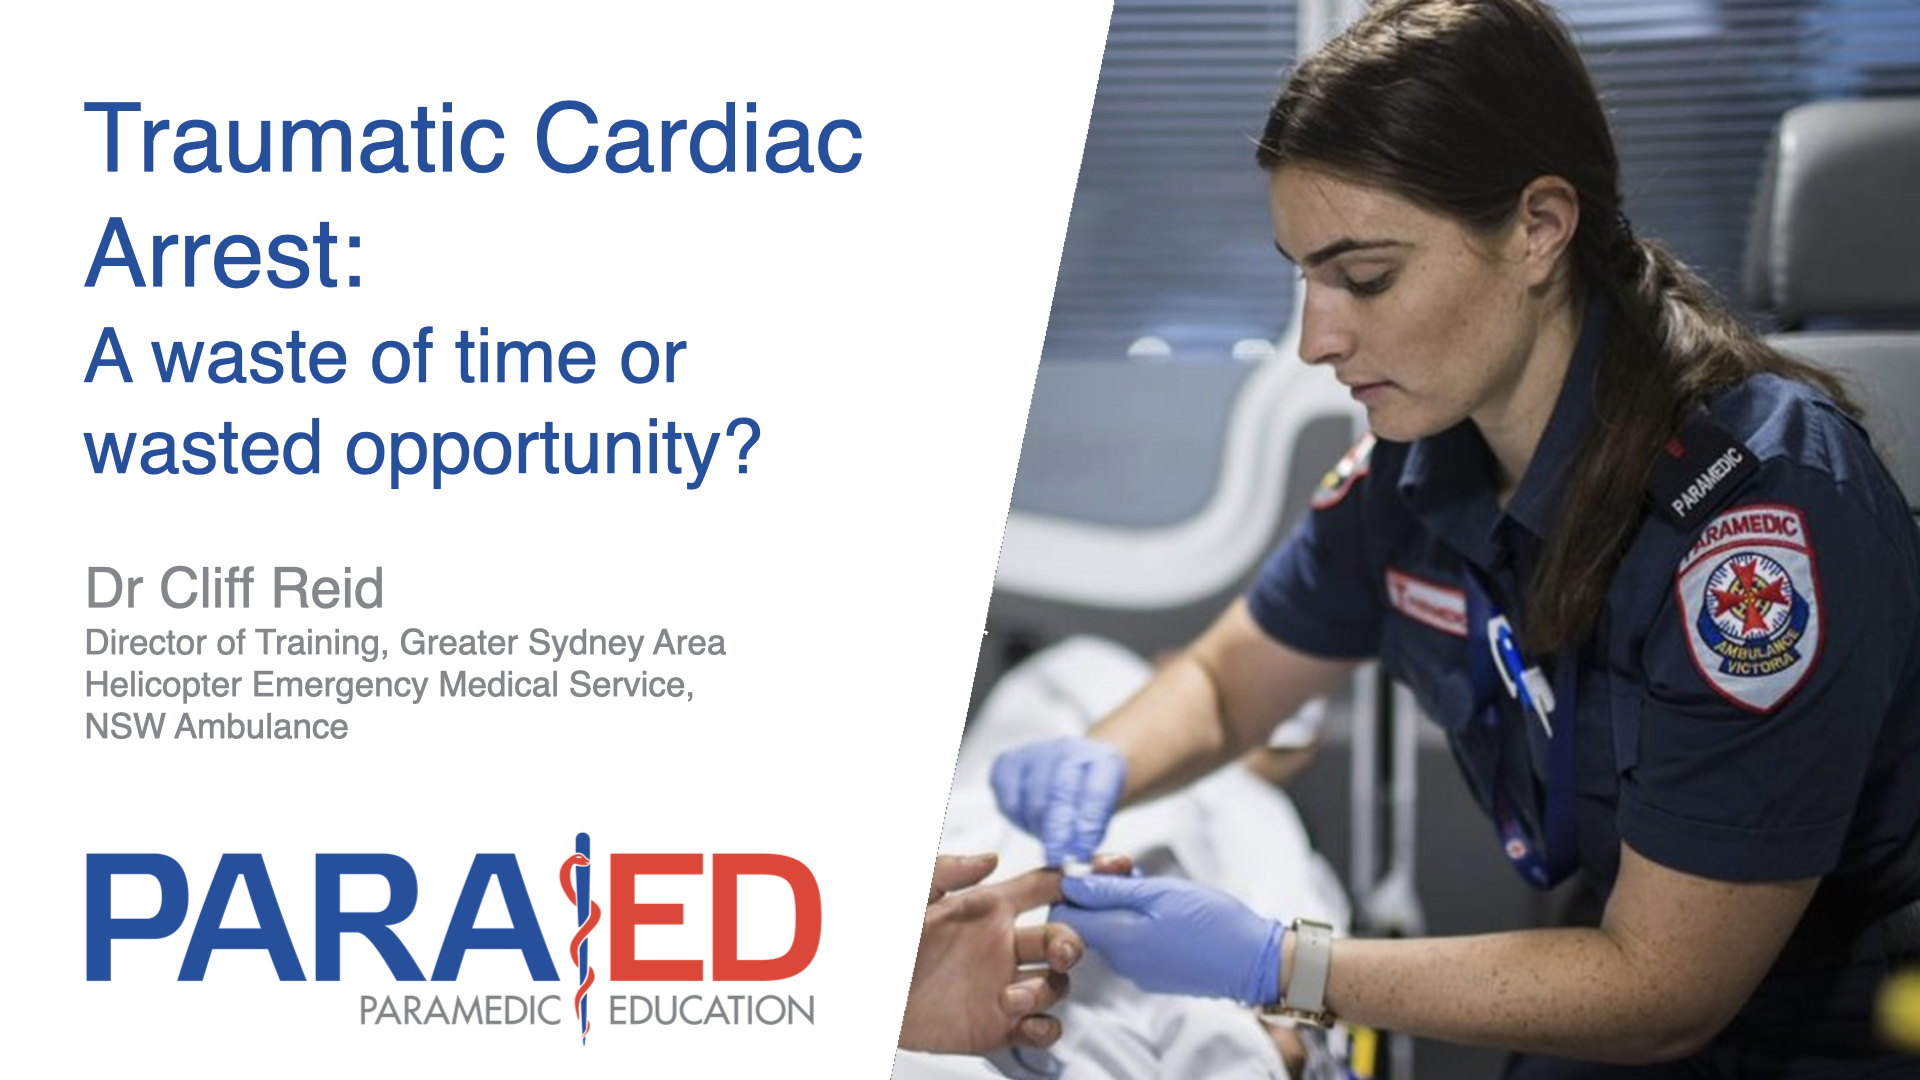 Traumatic Cardiac Arrest: A waste of time or wasted opportunity?